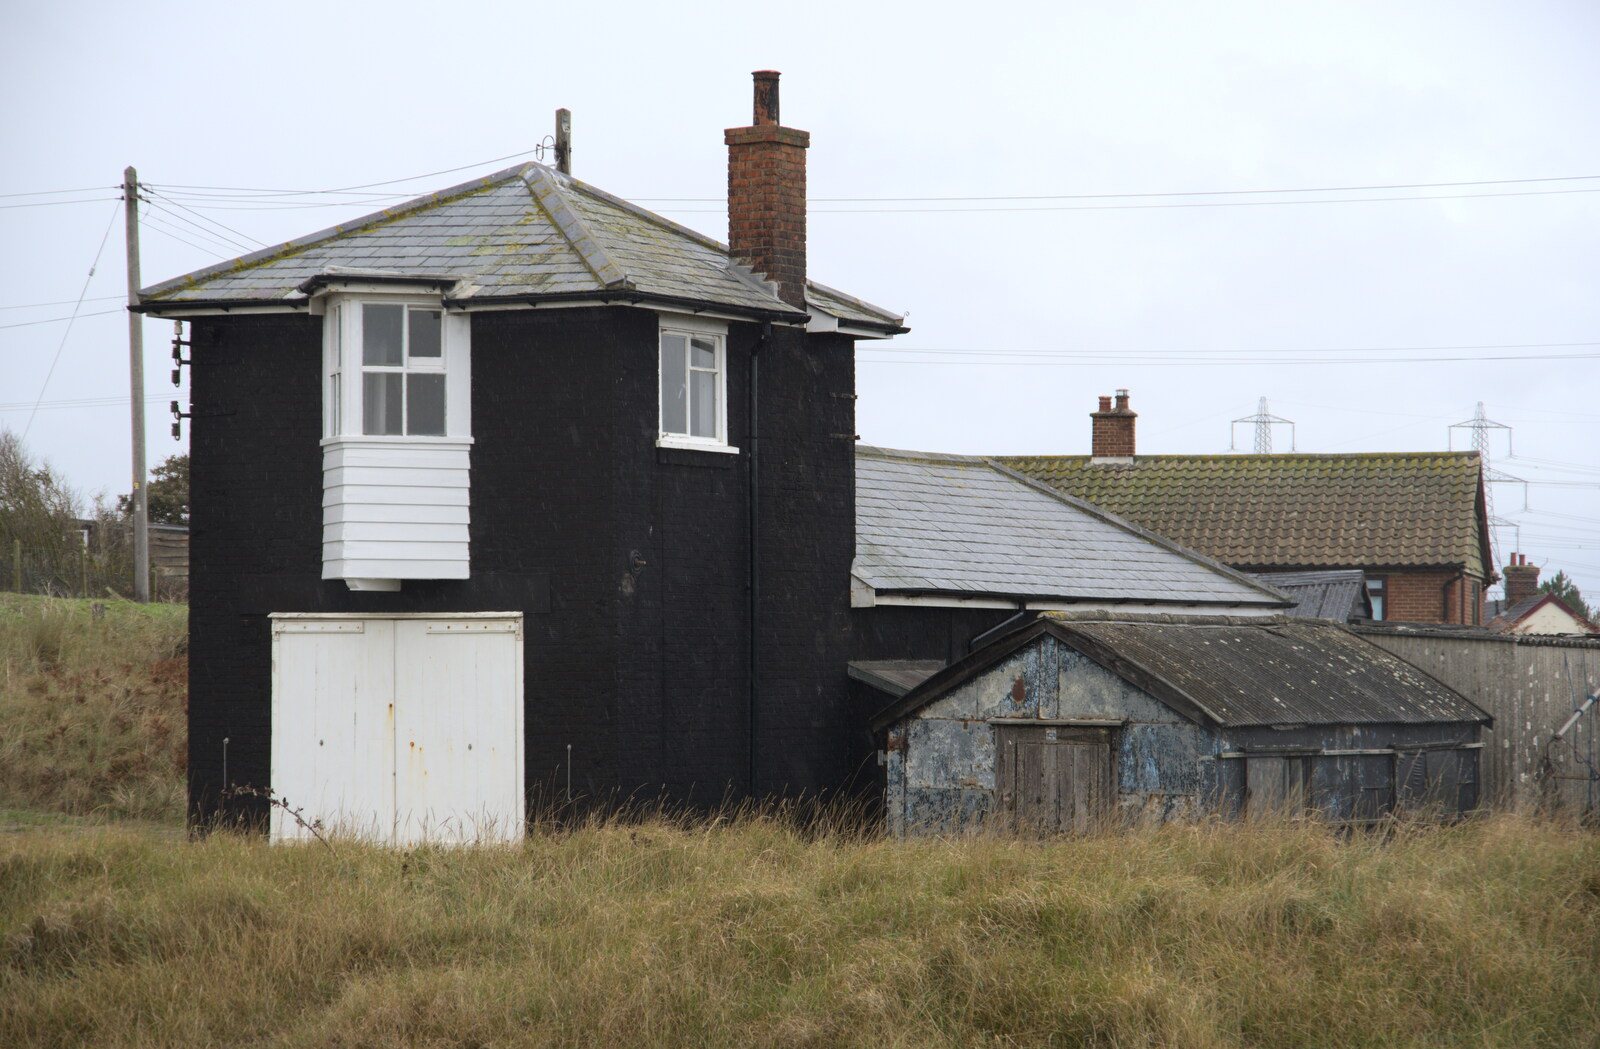 Some sort of look-out hut from Sizewell Beach and the Lion Pub, Sizewell and Theberton, Suffolk - 4th October 2020